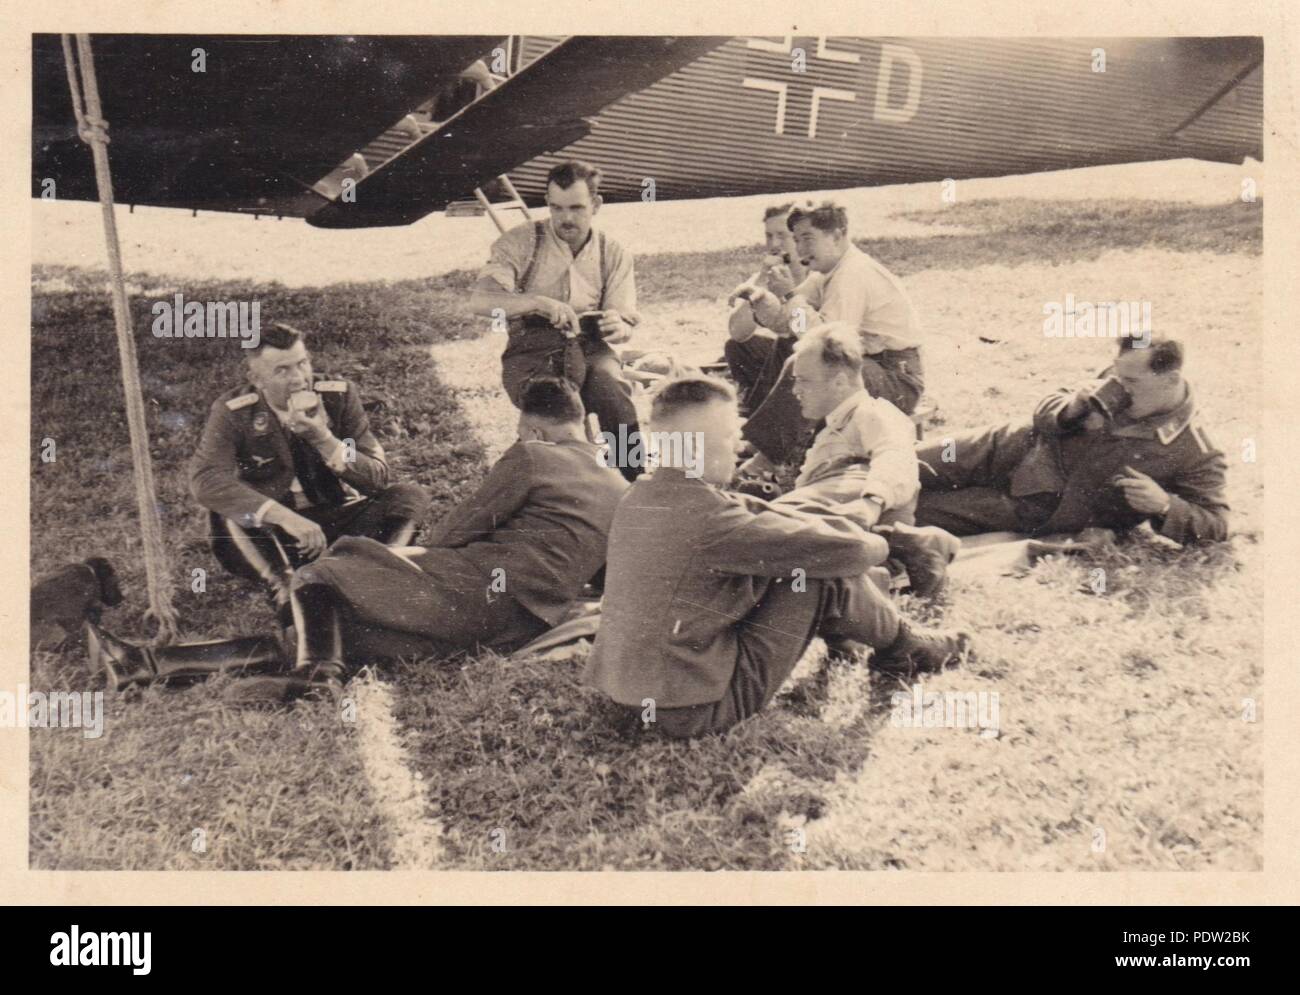 Image from the photo album of Oberfeldwebel Karl Gendner of 1. Staffel, Kampfgeschwader 40: Karl Gendner (on the right at the back) and other transport crewmen from 3./KGzbV 9 relax between missions beside their Junkers Ju52/3m transport aircraft at Krakow Airfield, Poland in September 1939. Stock Photo